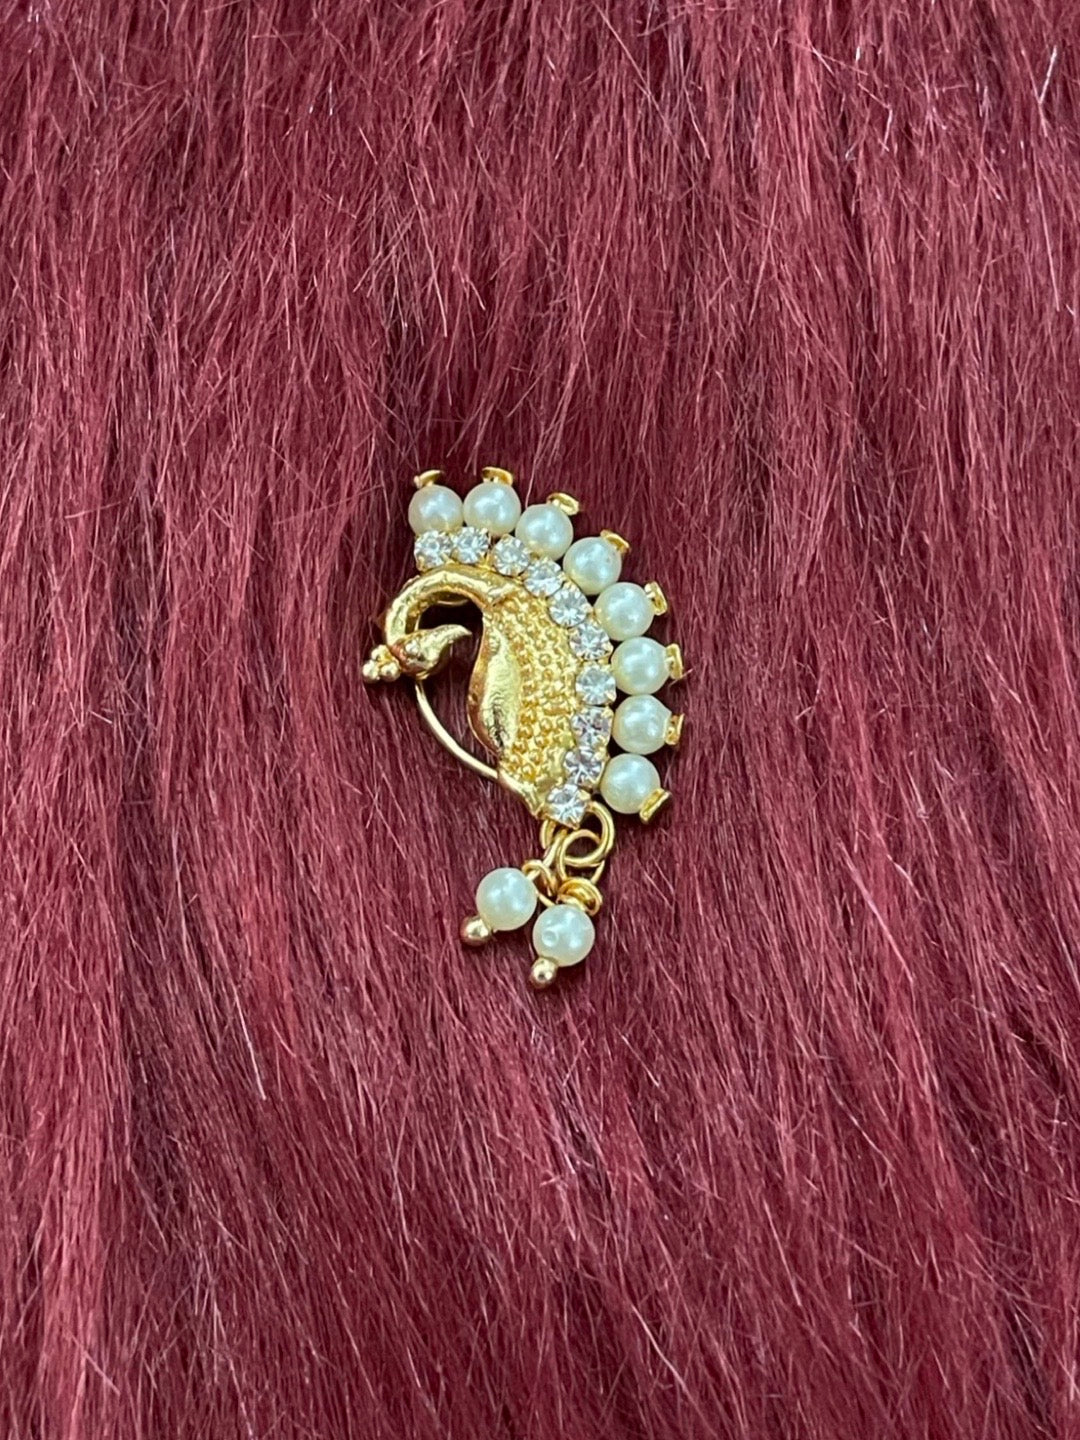 Maharashtrian Nath Gold Plated Peacock Design Nose Pin with Pearls